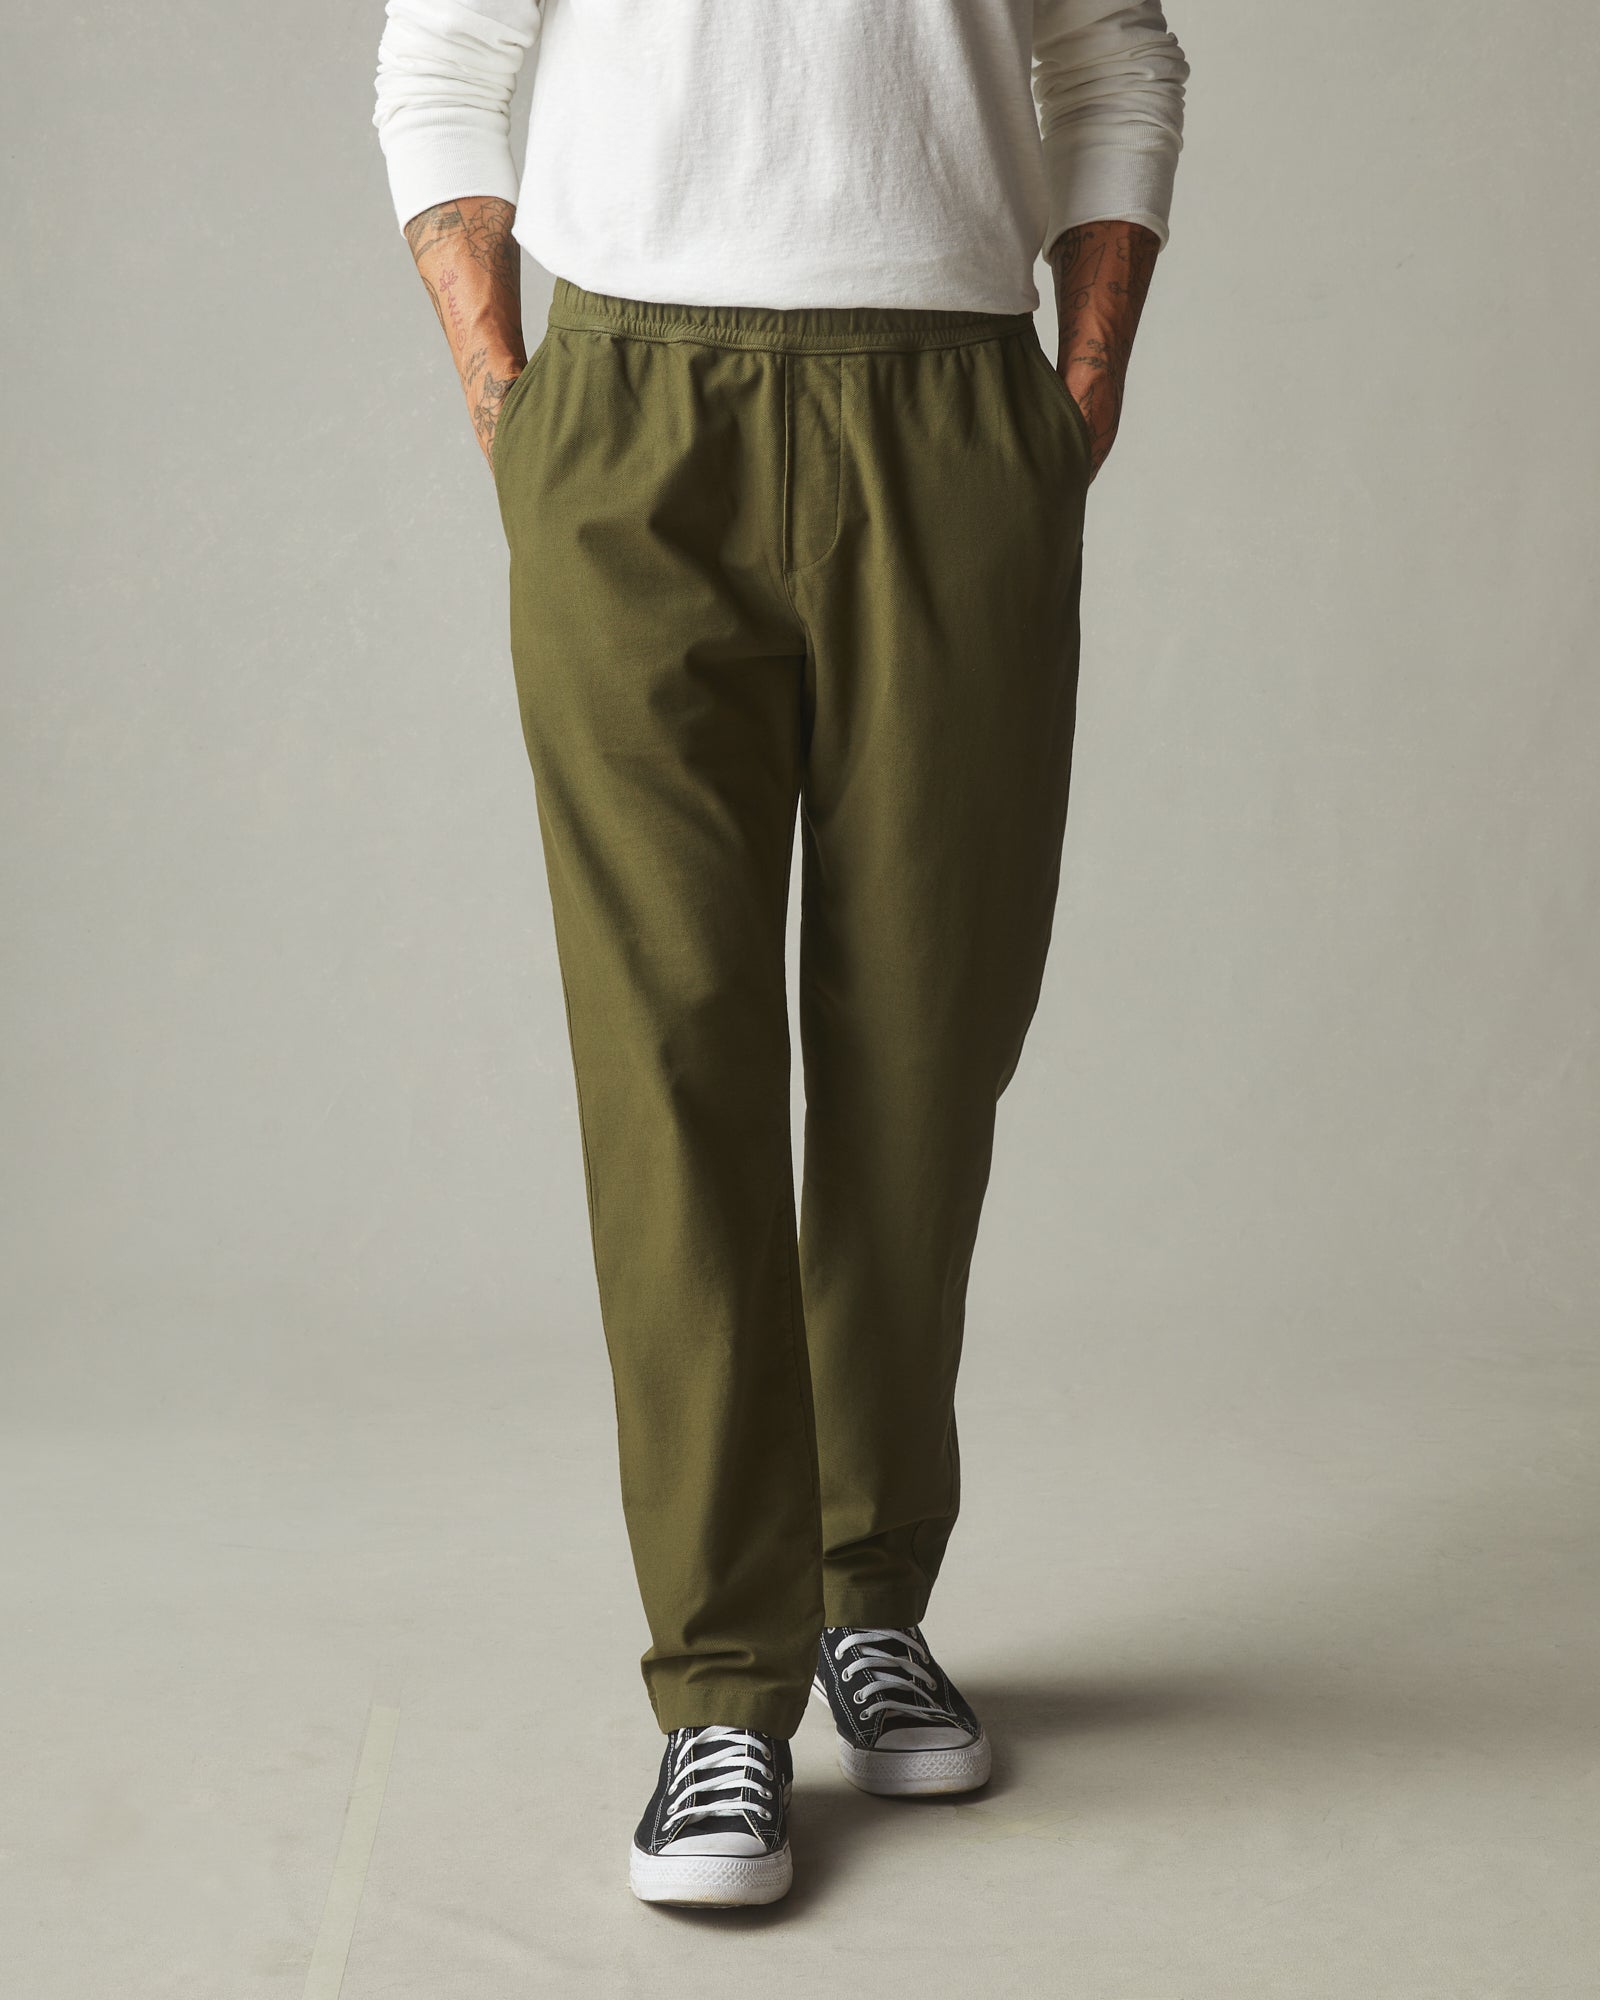 Men’s Slim-Fit Fashionable Twill Jogger Pants (Sizes: S-2XL) NEW FREE  SHIPPING 